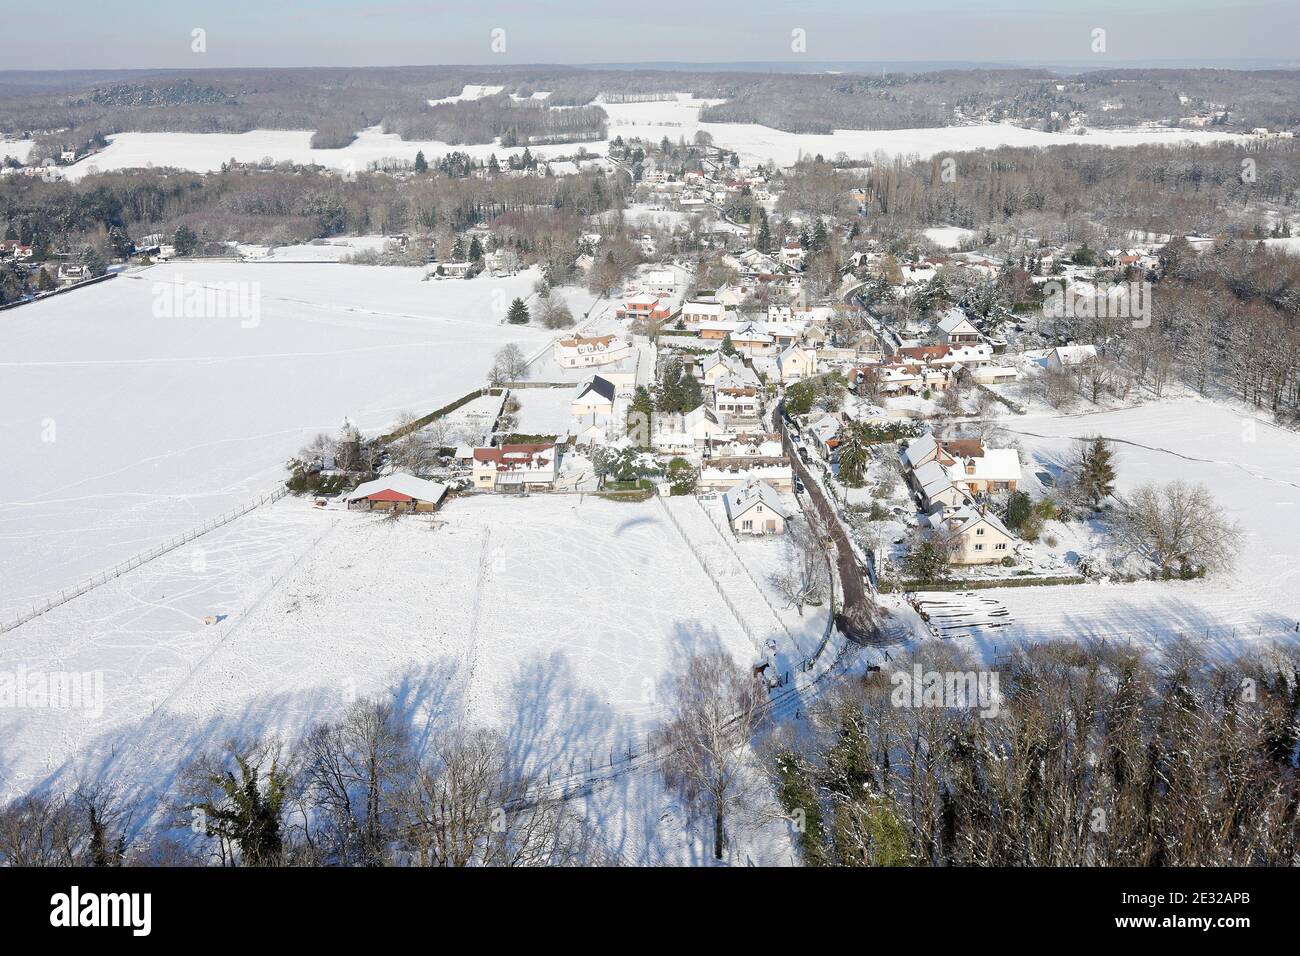 Saint-Cyr-sous-Dourdan under the snow seen from the sky by paramotor on February 08, 2018, Essonne departement, Île-de-France region, France. Stock Photo